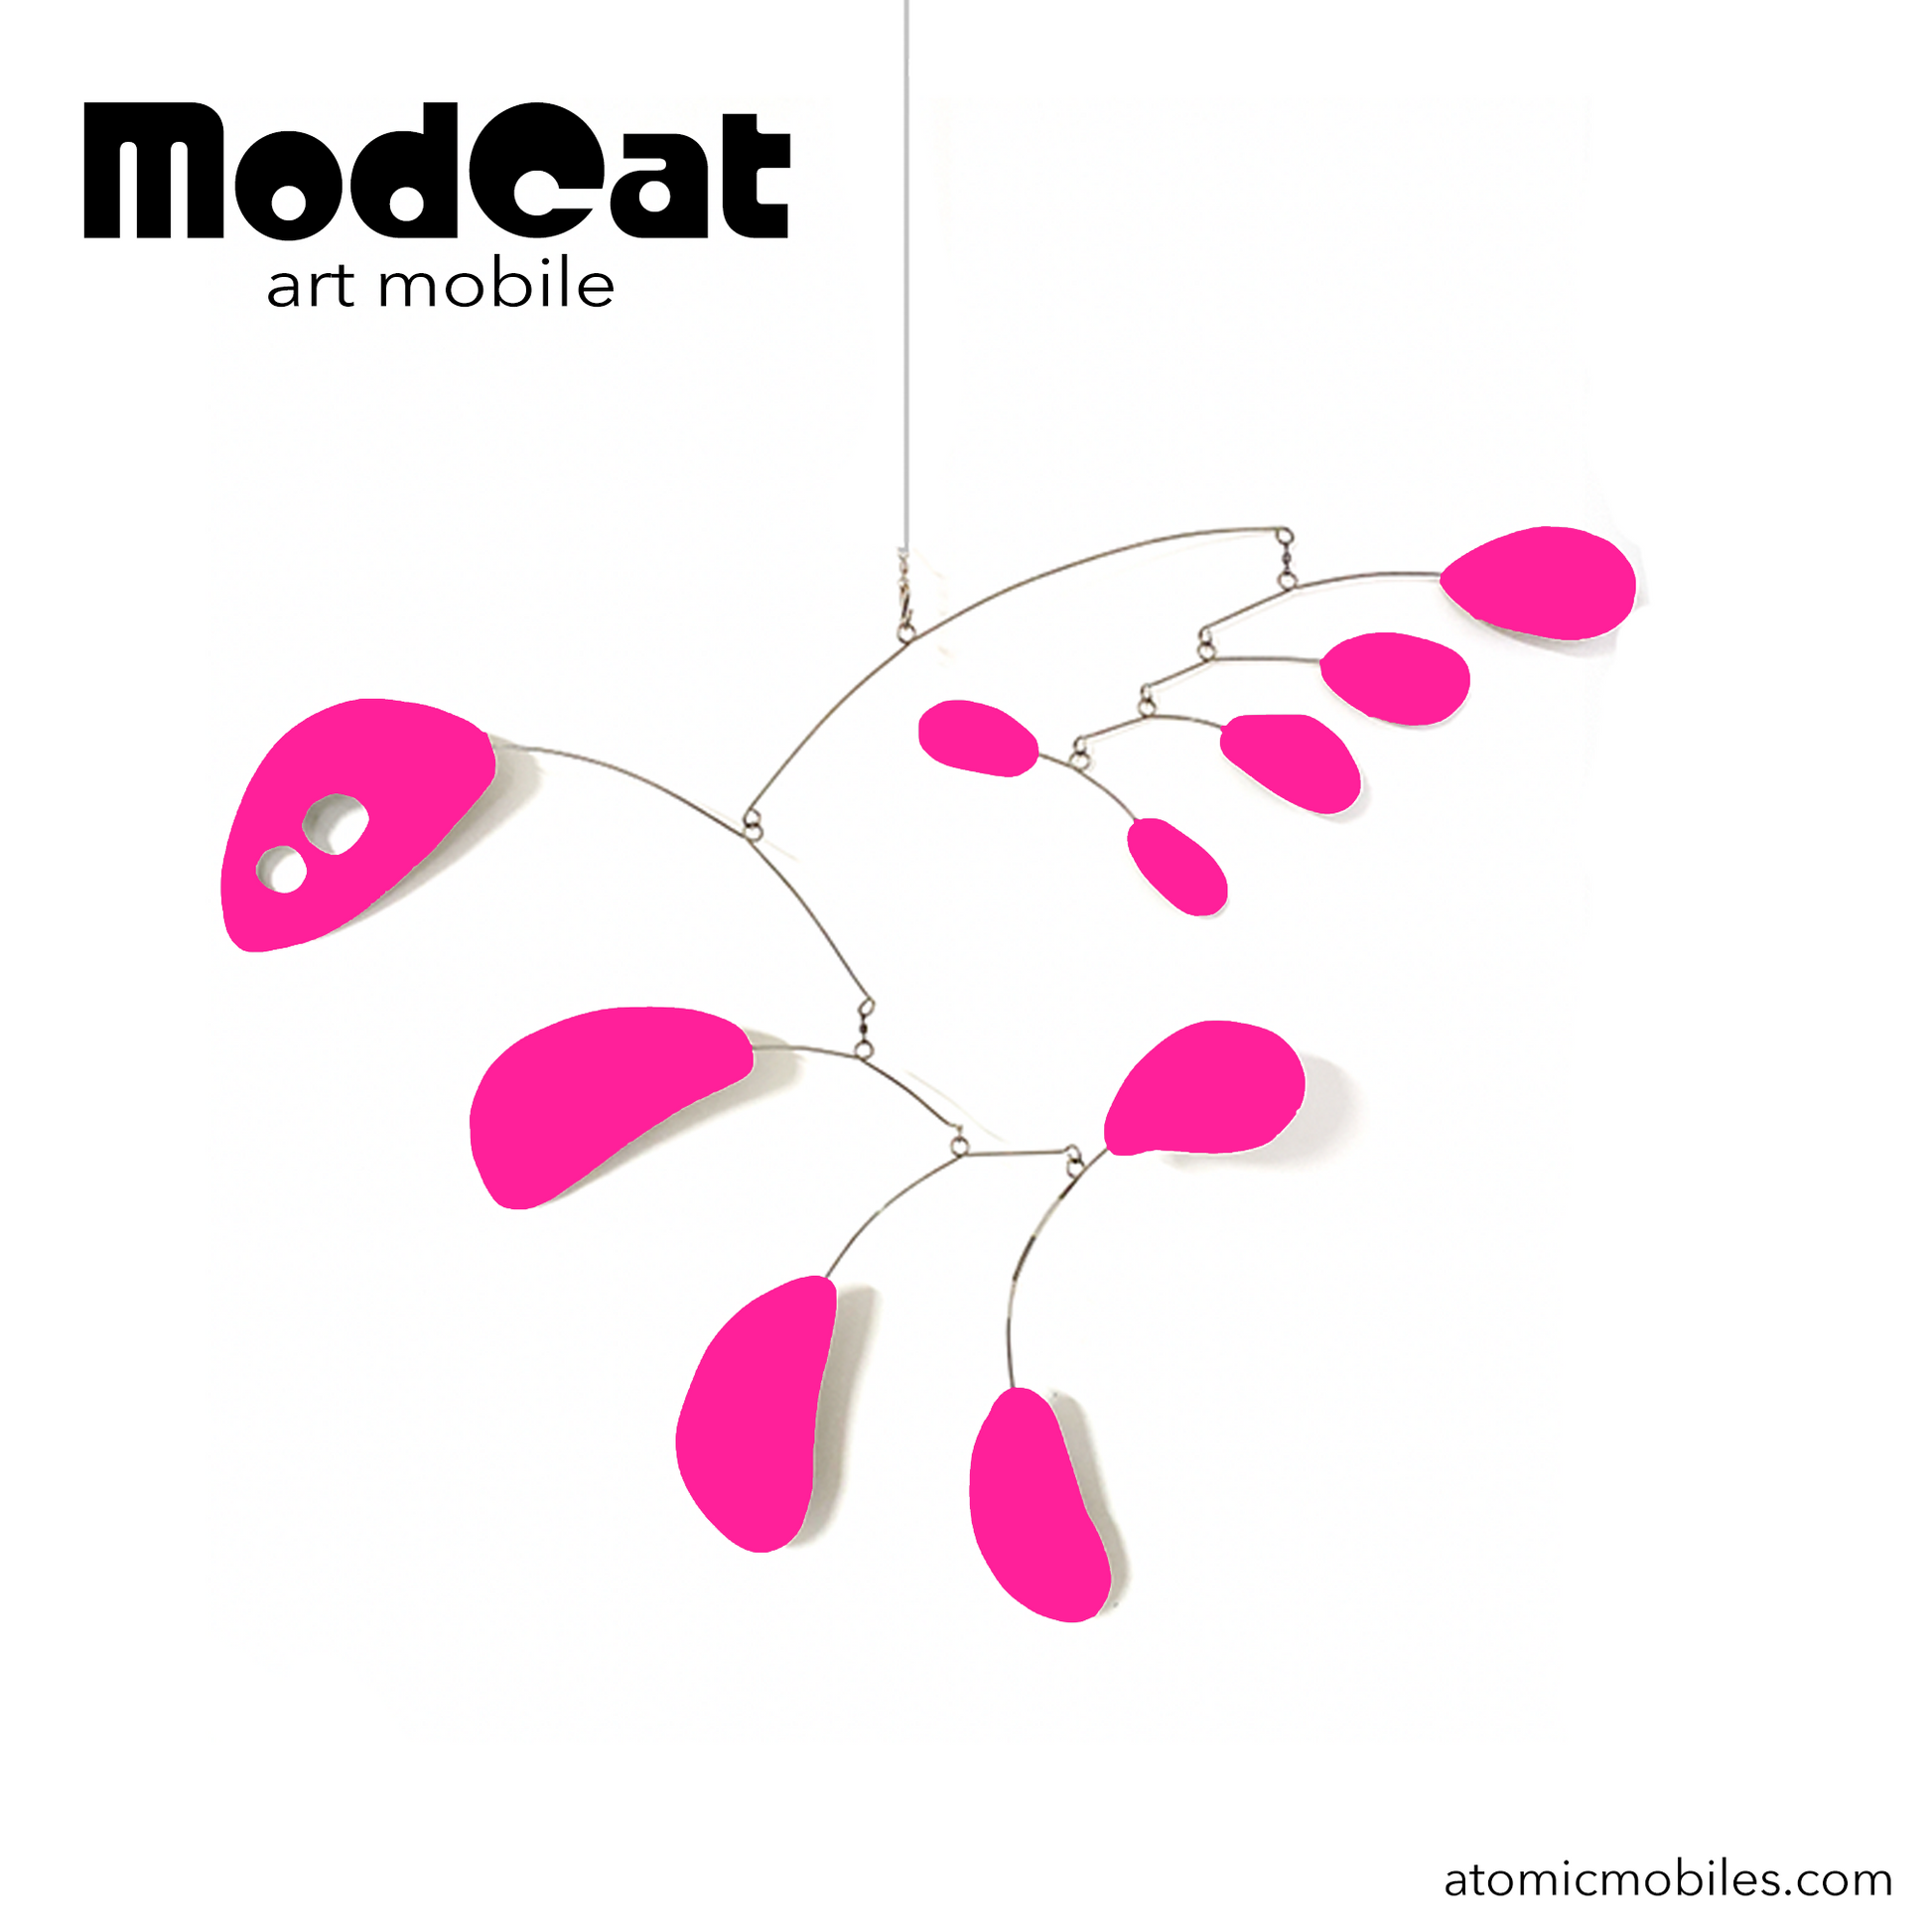 ModCat kinetic art mobile in Intense Hot Barbie Dream House Pink - hanging art mobile in MOD mid century modern style for your Barbiecore home decor by AtomicMobiles.com